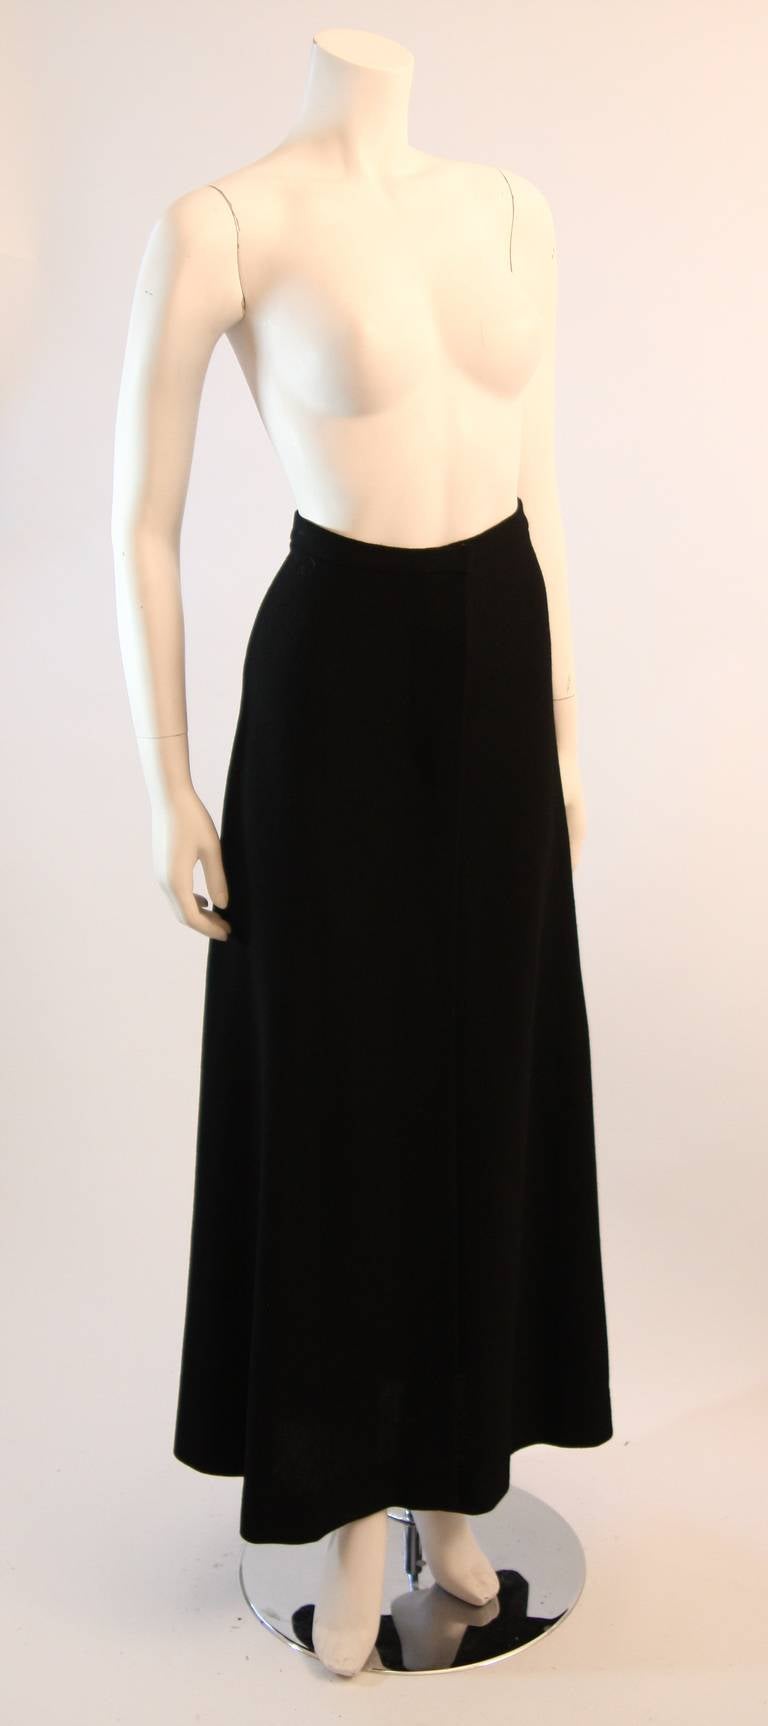 This is a gorgeous Halston maxi skirt. It is composed of a perfect stretch knit in black with a full swooping flare. An absolute stunner. The skirt features snap  closures and a slit at the center front. 

Measures (Approximately)
Size